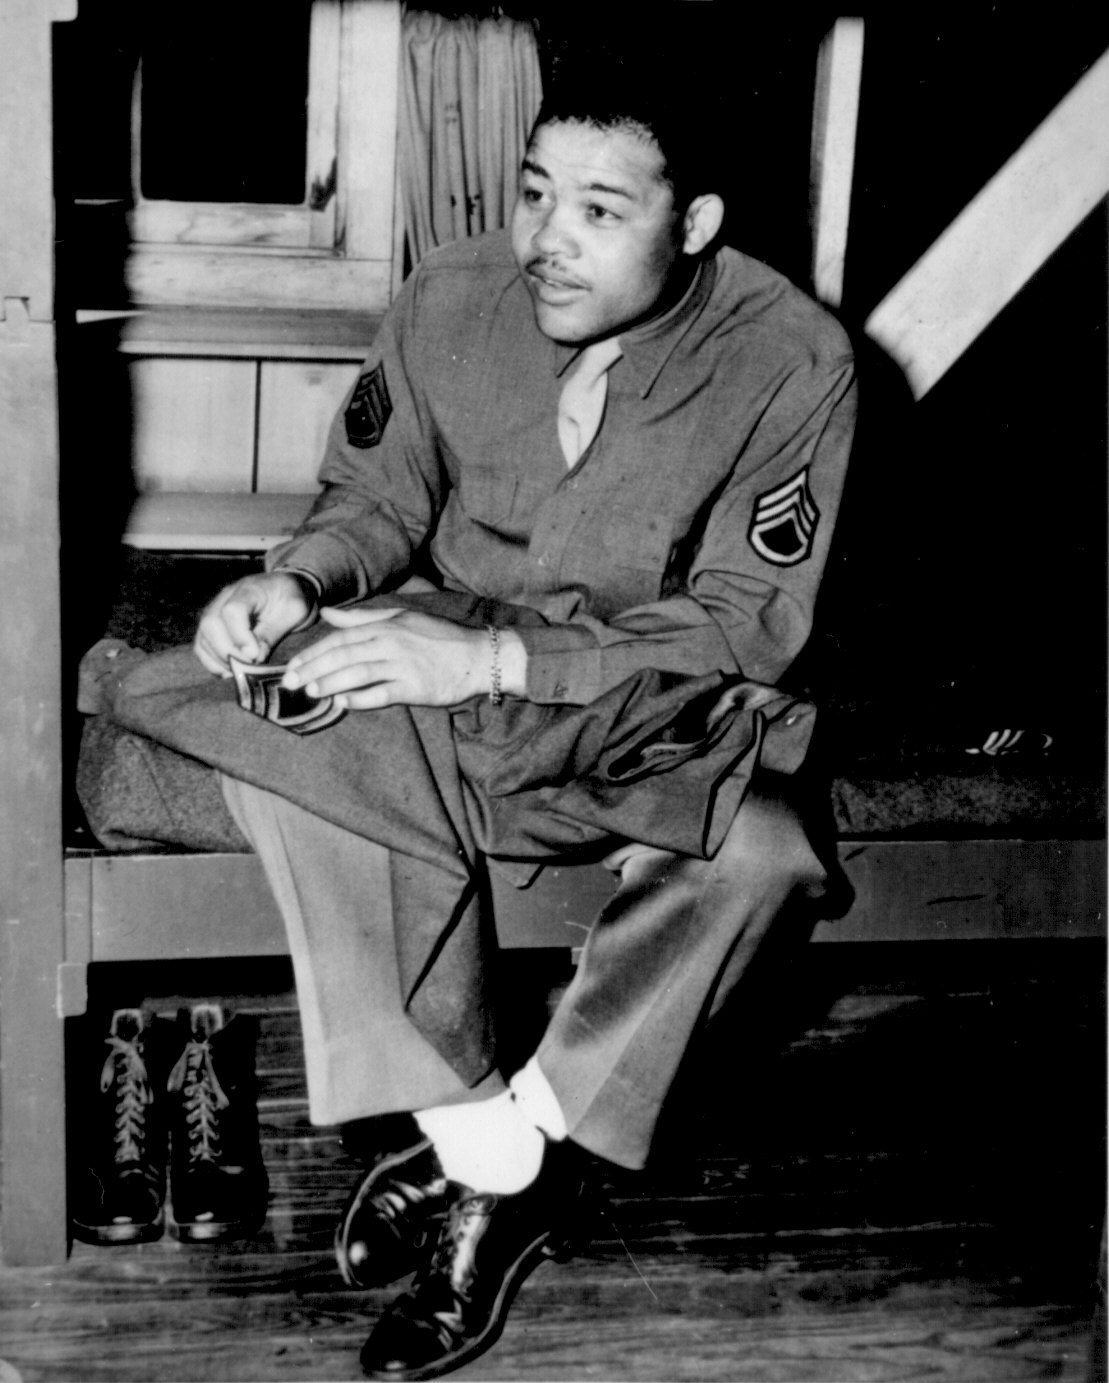 African-American boxing champion and US Army Technical Sergeant Joe Louis sewing his rank patch onto his uniform, 10 Apr 1945